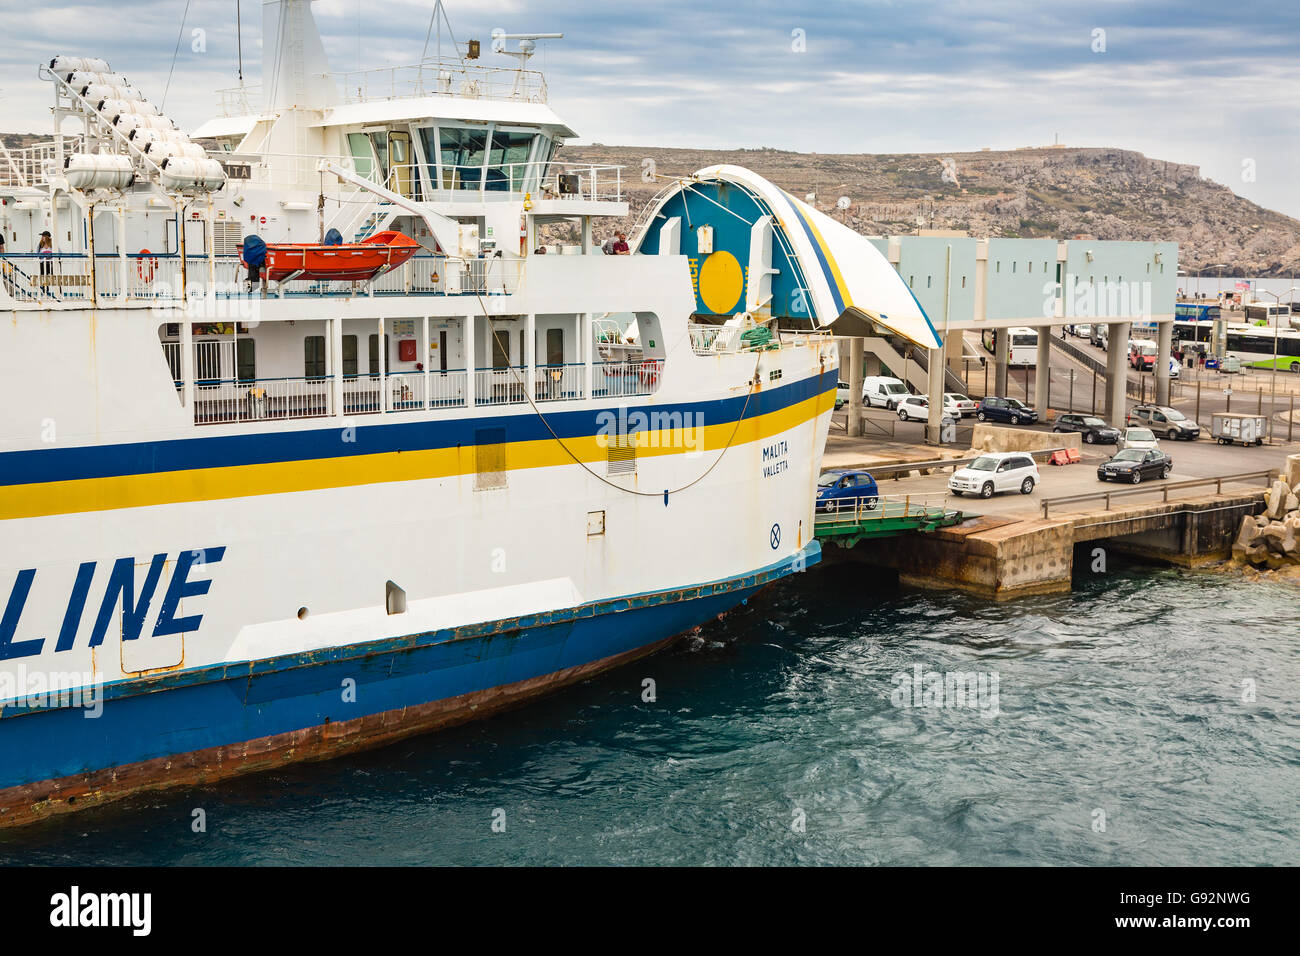 Cirkewwa, Malta - May 06, 2016: Ferries between the islands of Malta and Gozo transports people and cars shuttle system. Stock Photo